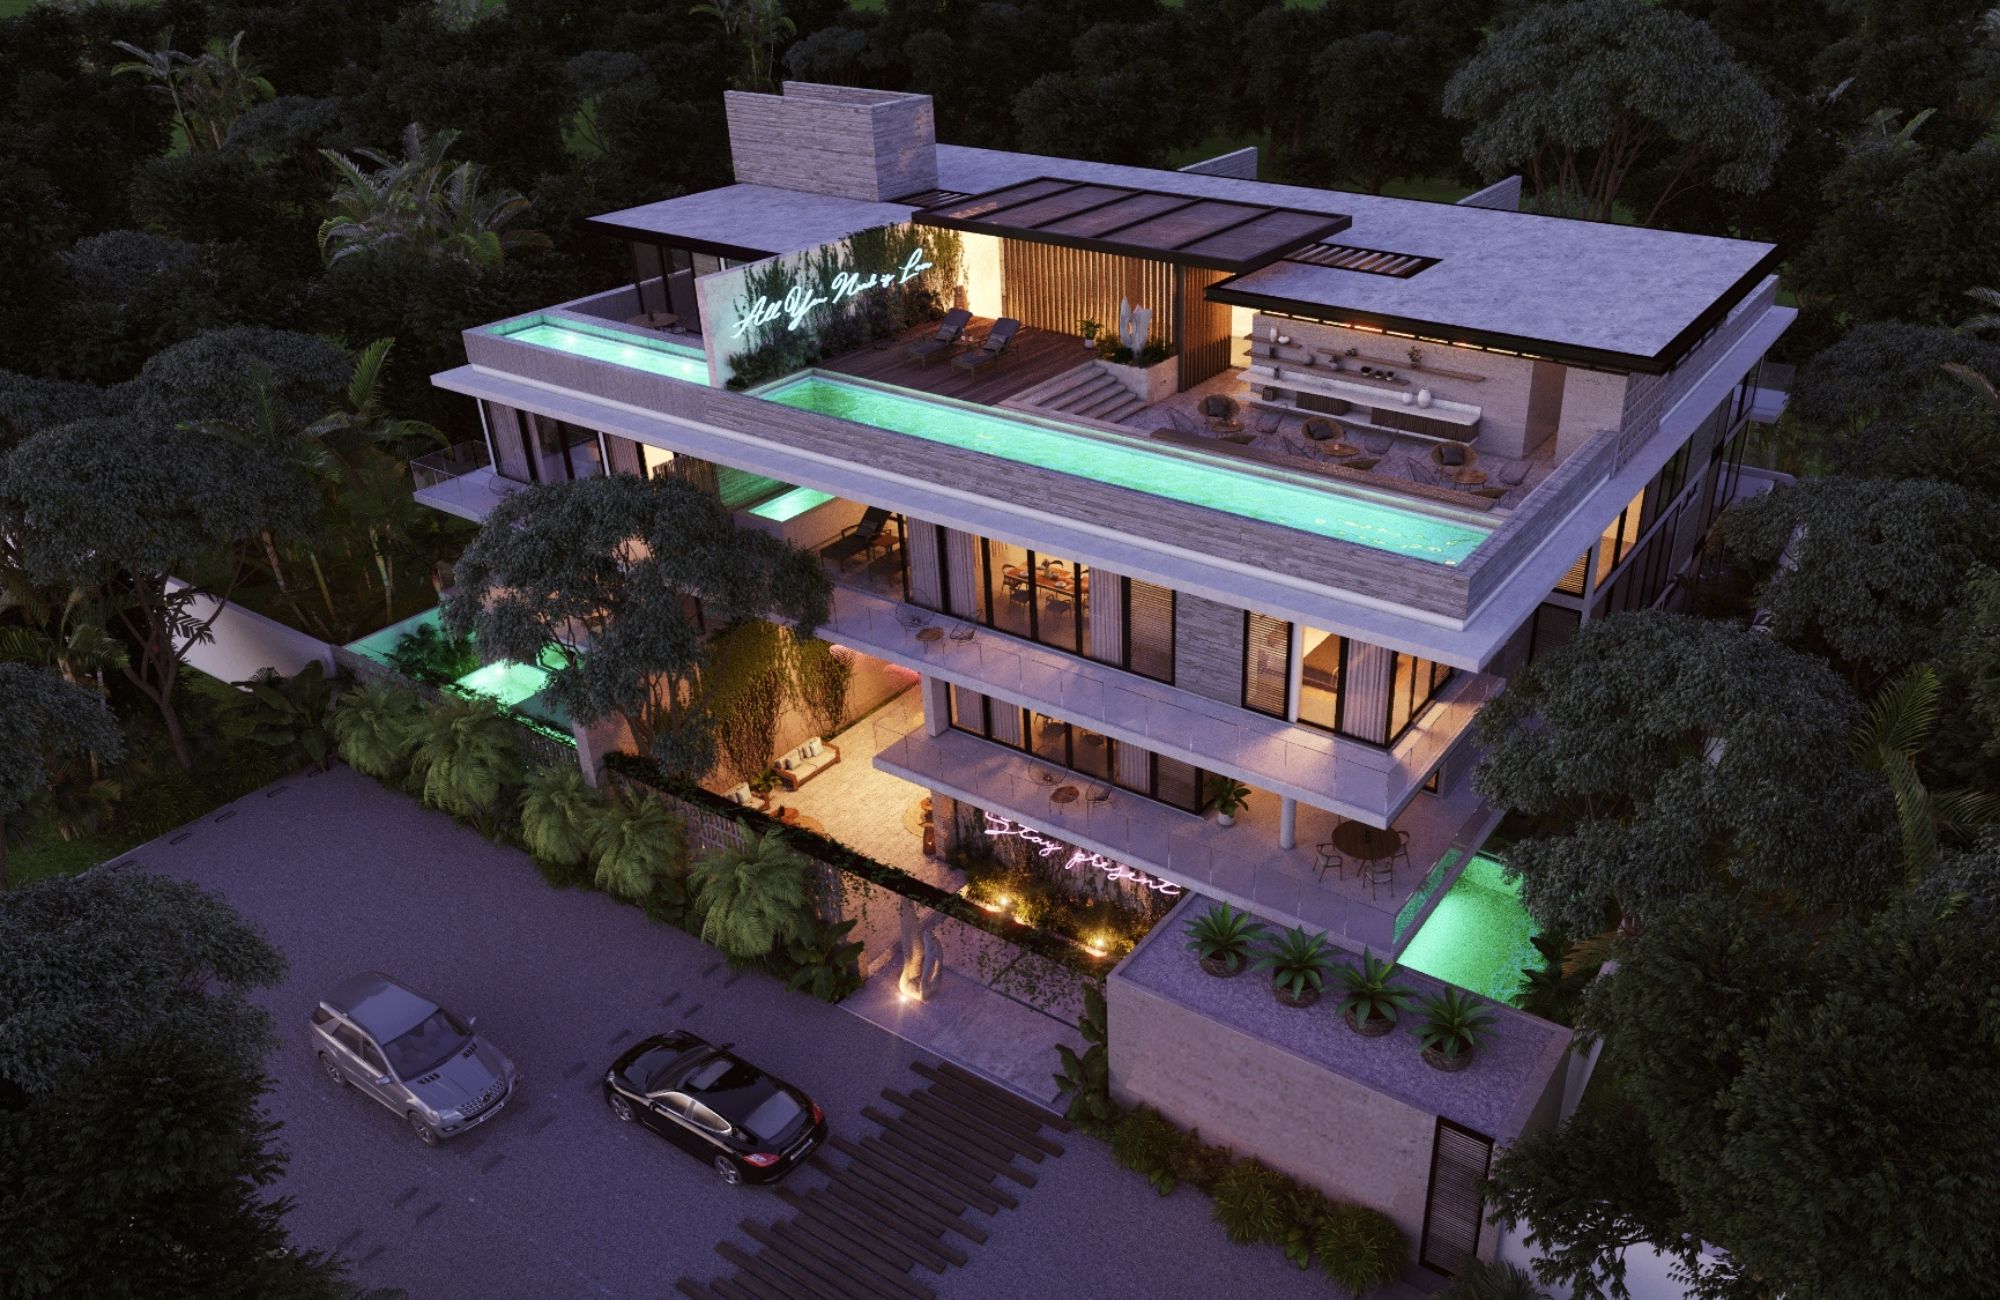 Modern condo with amenities, Tesla charger and dron for passengers